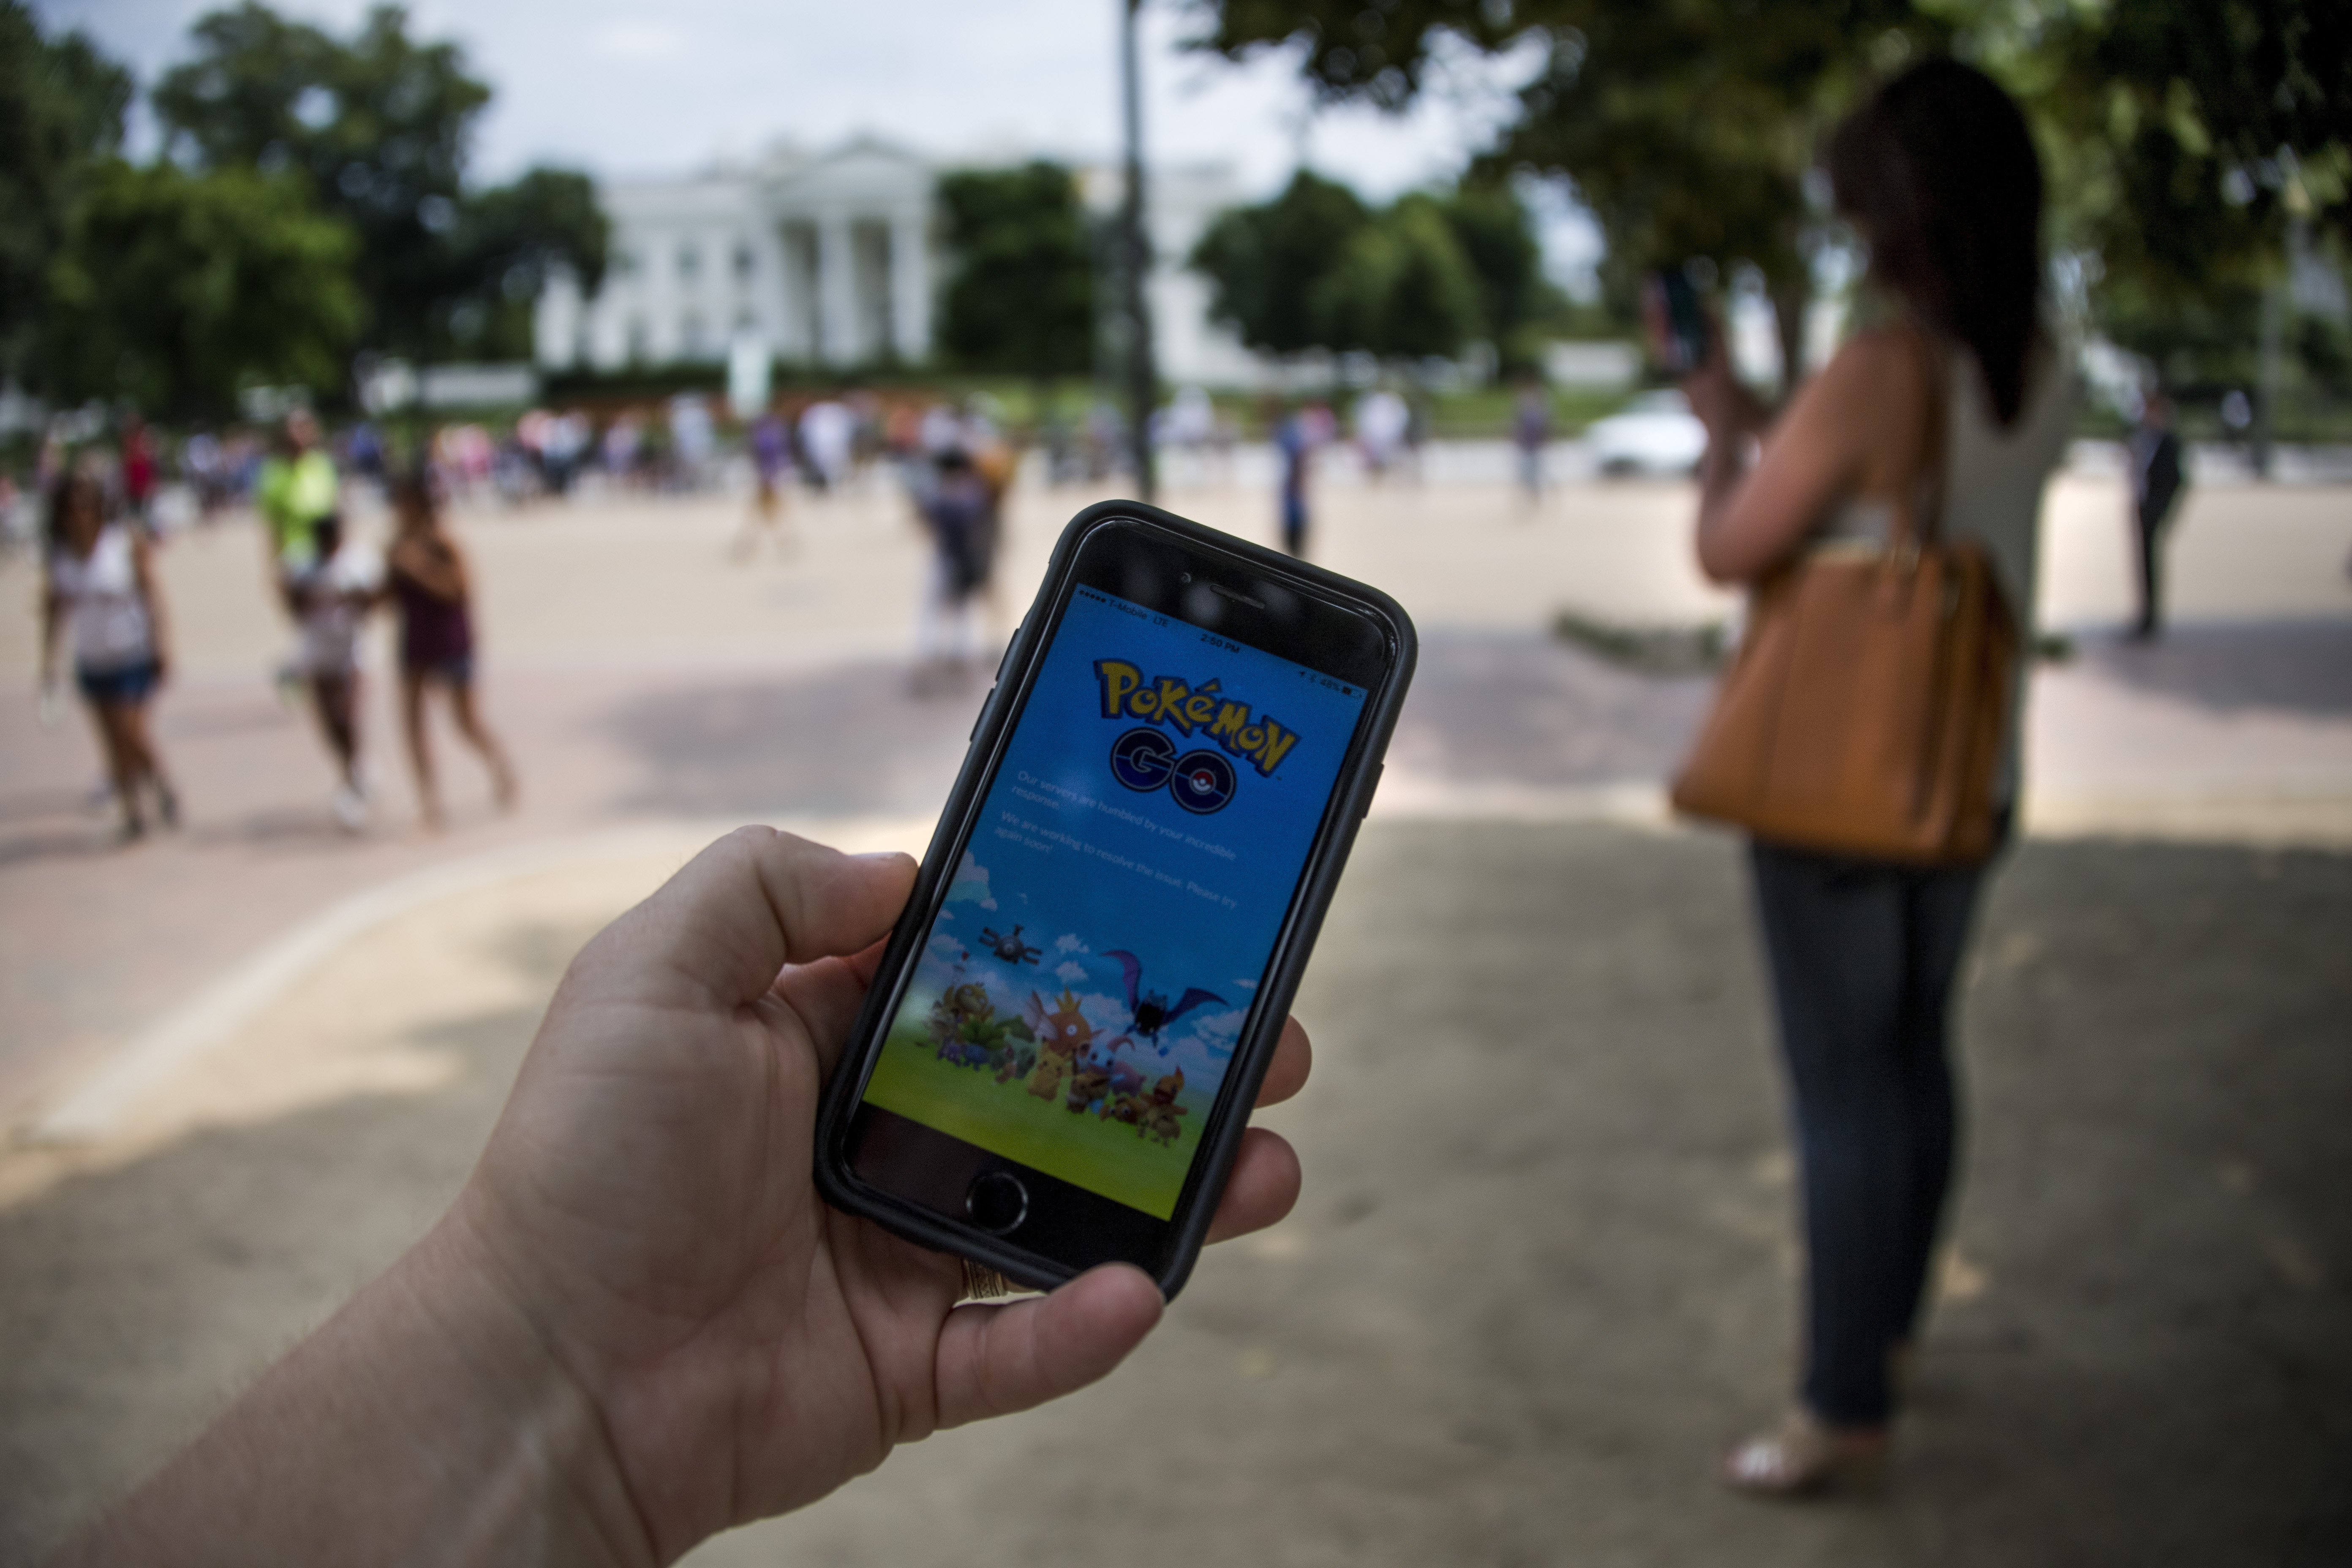 A man holds up his cell phone with a screen shot of the Pokemon Go game as a woman searches on her cell phone for a Pokemon in front of the White House in Washington, DC, July 12, 2016. Pokémon Go mania is sweeping the US as players armed with smartphones hunt streets, parks, rivers and elsewhere to capture monsters and gather supplies in the hit game. The free application based on a Nintendo title that debuted 20 years ago has been adapted to the mobile internet Age by Niantic Labs, a company spun out of Google last year after breaking ground with an "Ingress" game that merged mapping capabilities with play. As of July 11, 2016 Pokémon Go had been downloaded millions of times, jumping topping rankings at official online shops for applications tailored for smartphones powered by Apple or Google-backed Android software.  / AFP PHOTO / JIM WATSON